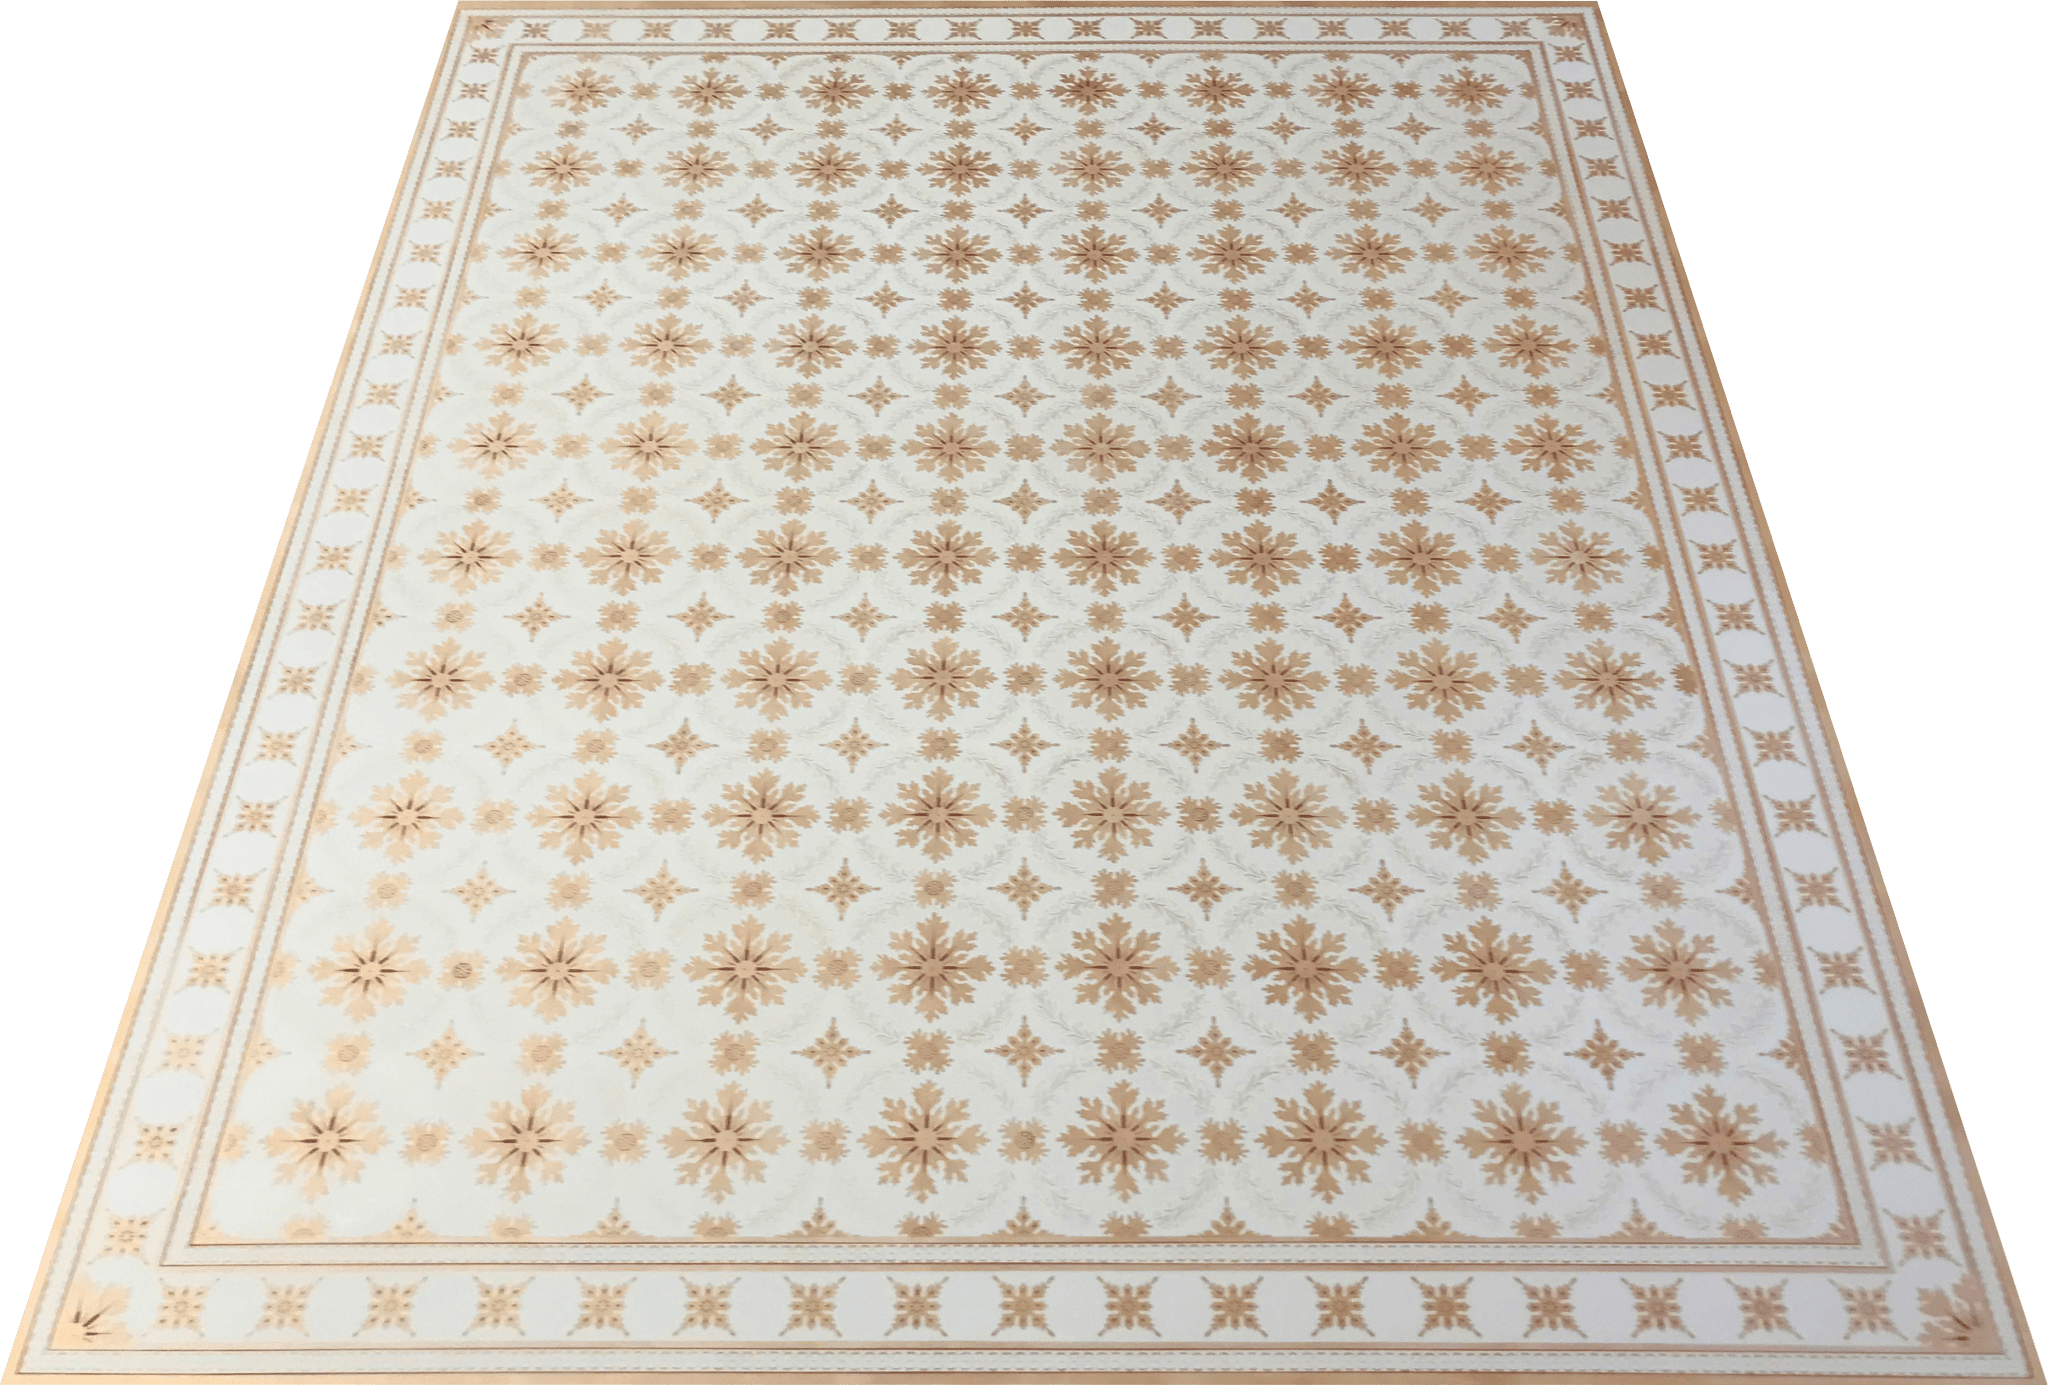 This is a full image of this floorcloth based on a pattern recorded by Esther Stevens Brazer from the Humphries House, c.1800.